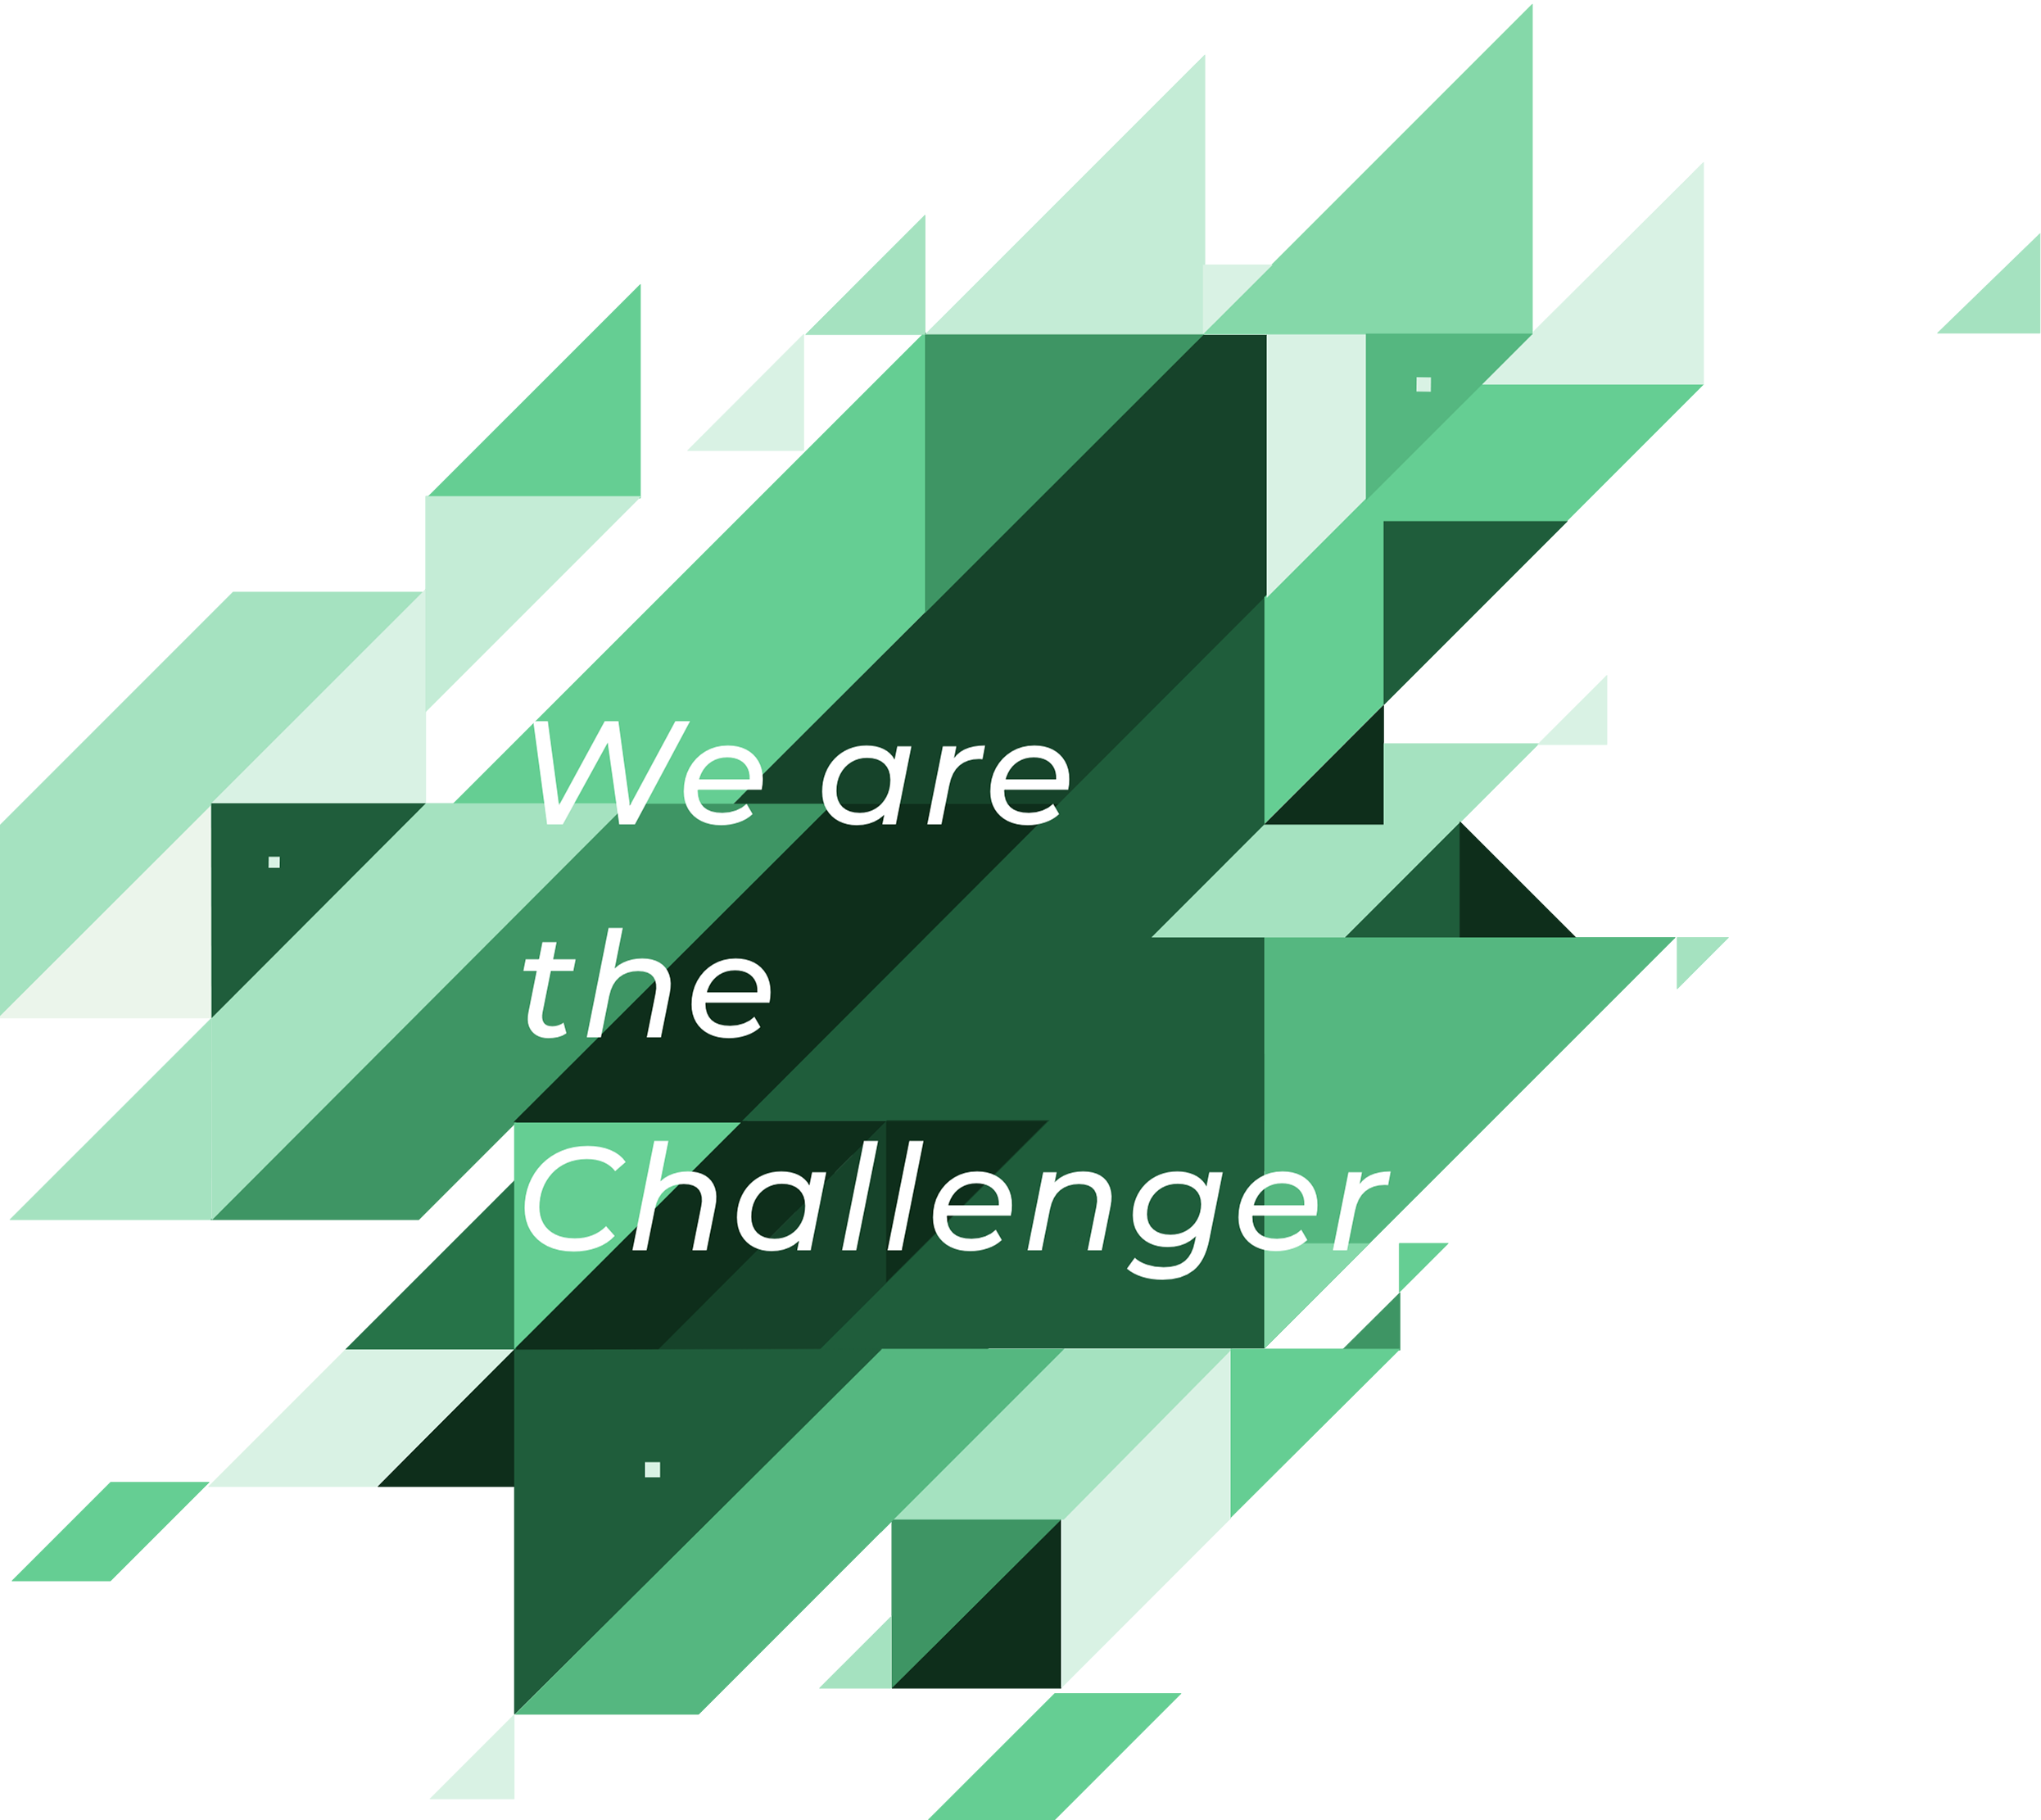 We are the Challenger